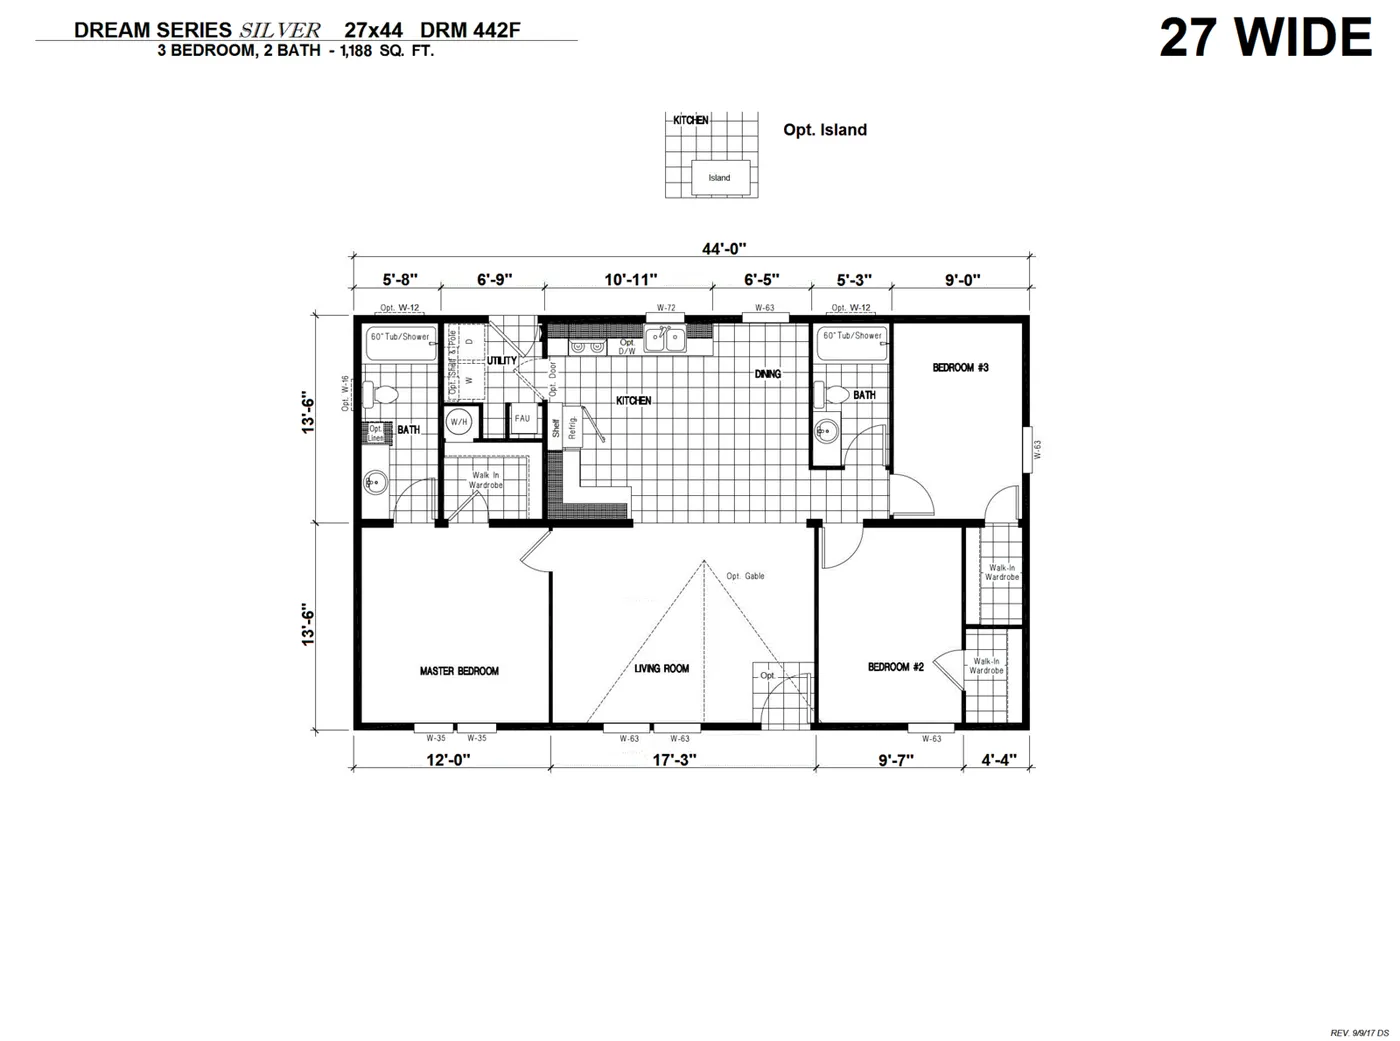 The DRM442F 44' DREAM Floor Plan. This Manufactured Mobile Home features 3 bedrooms and 2 baths.